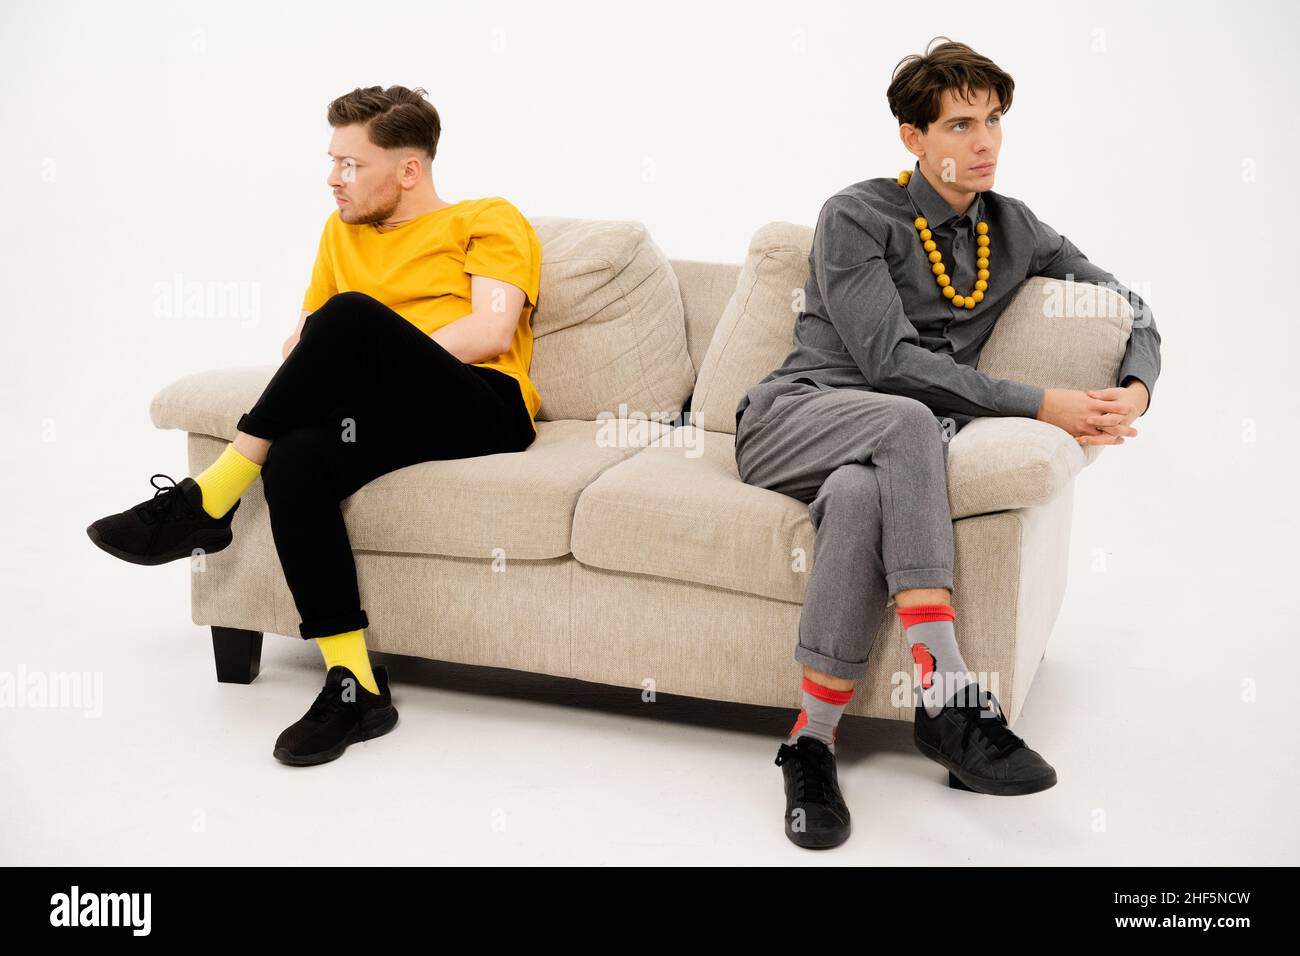 Two Friends Quarreled and Sat on Opposite Sides of the Sofa. Men are in a Quarrel and sit on the Couch at a Distance from Each Other. Close-up. High quality photo Stock Photo